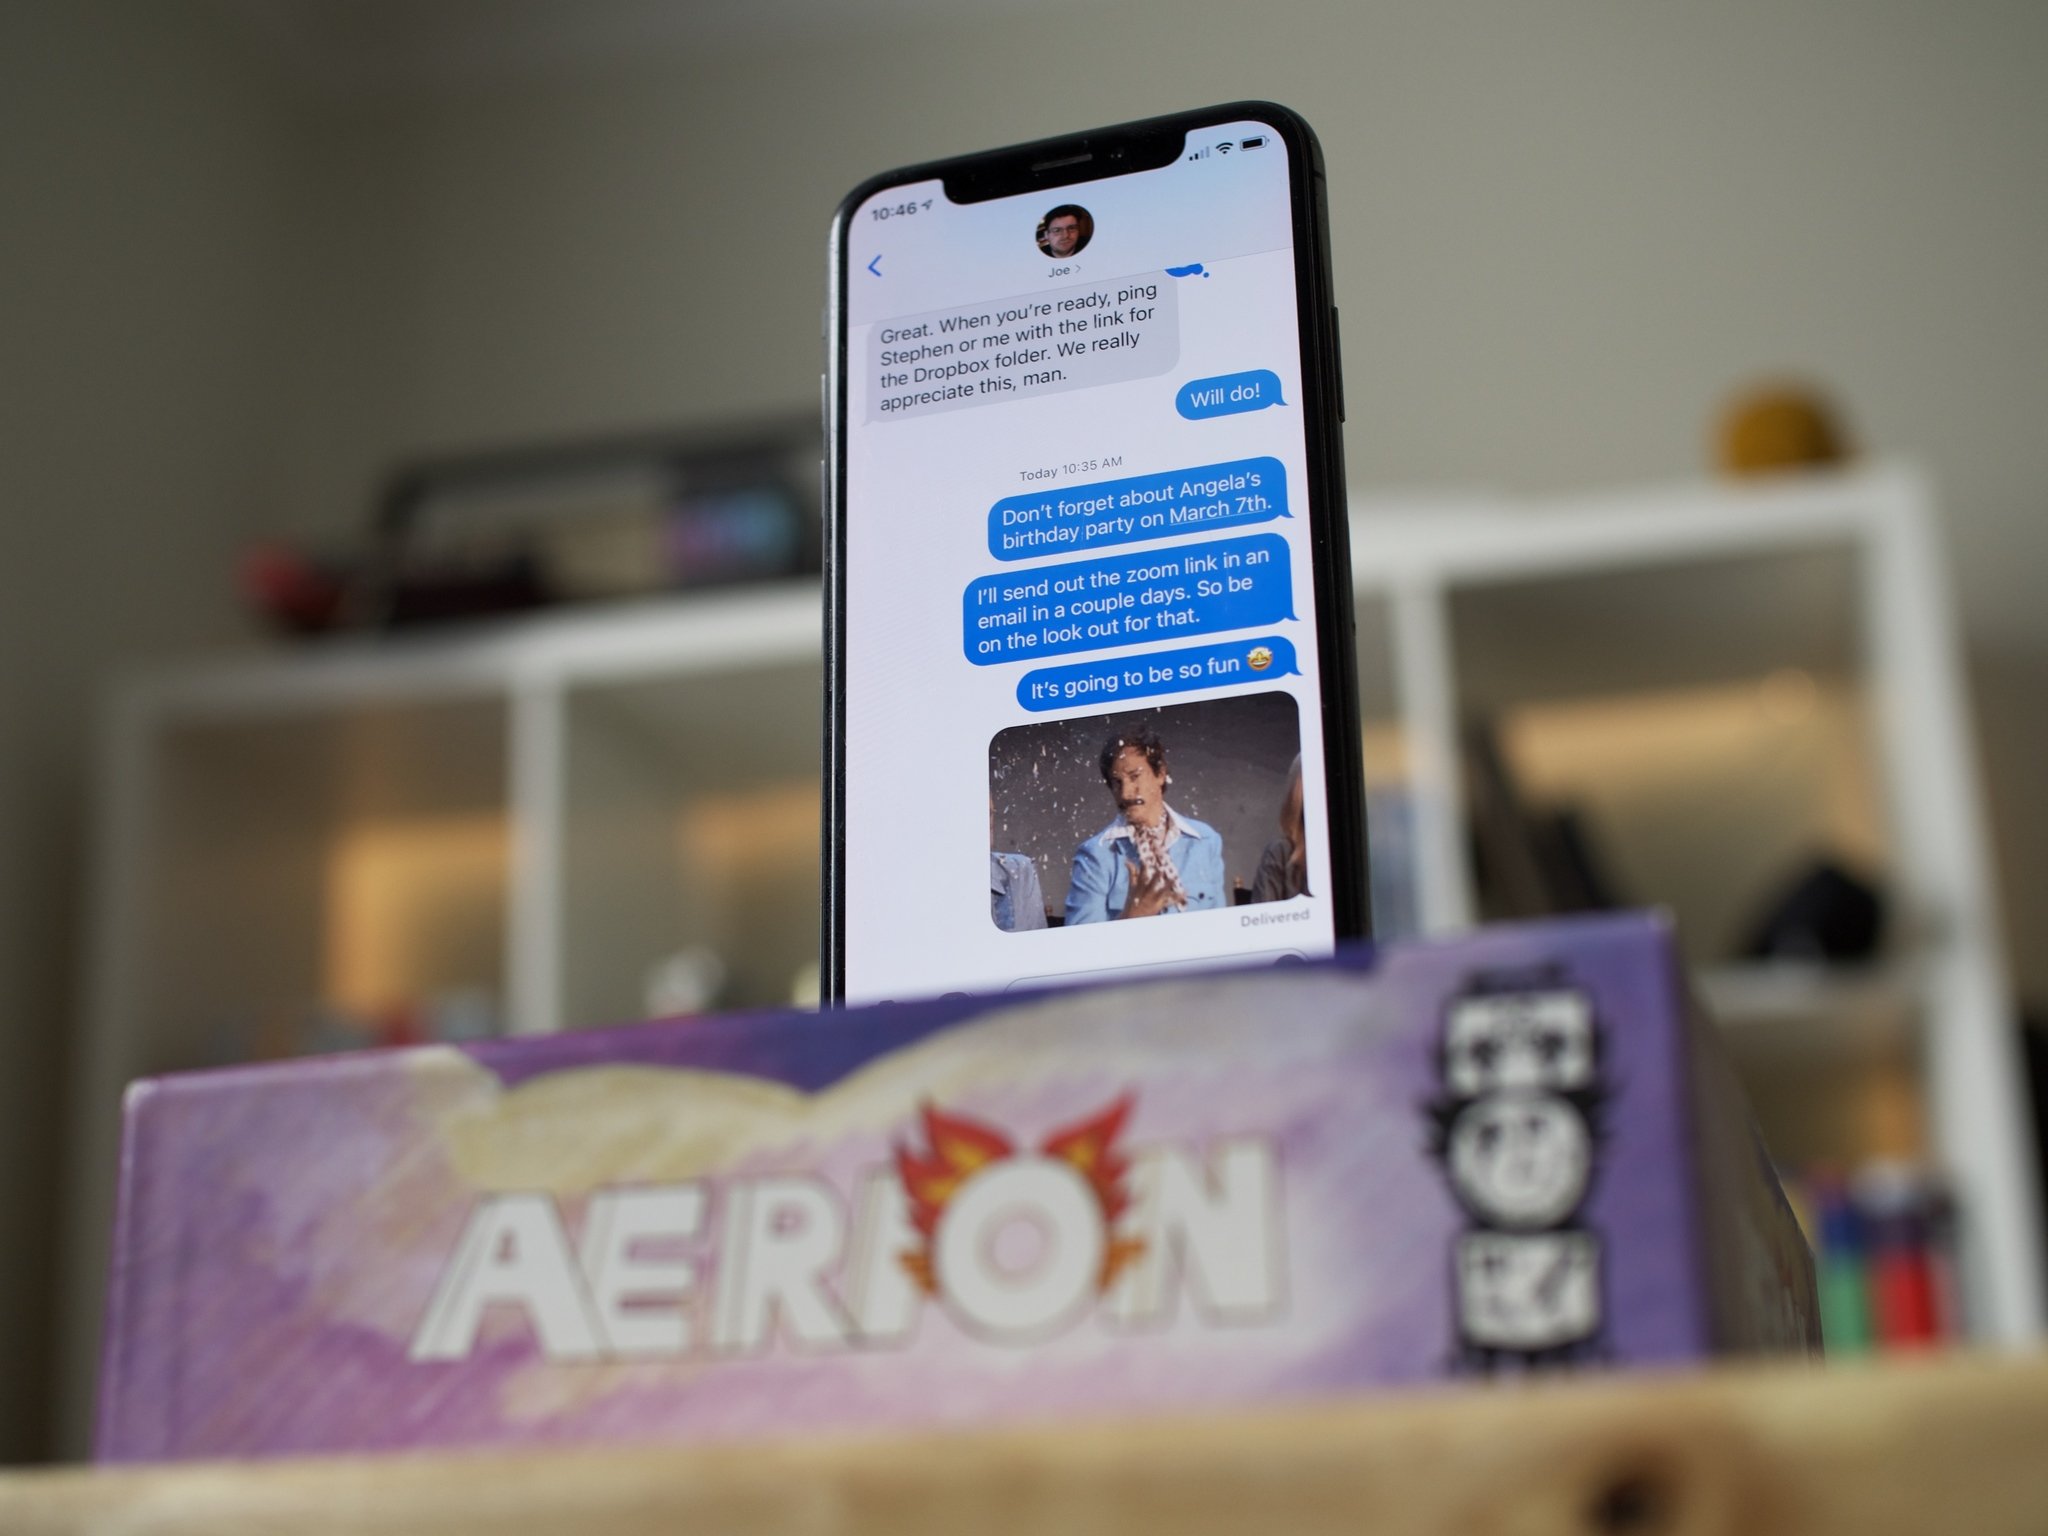 iMessage thread on iPhone in iOS 14     